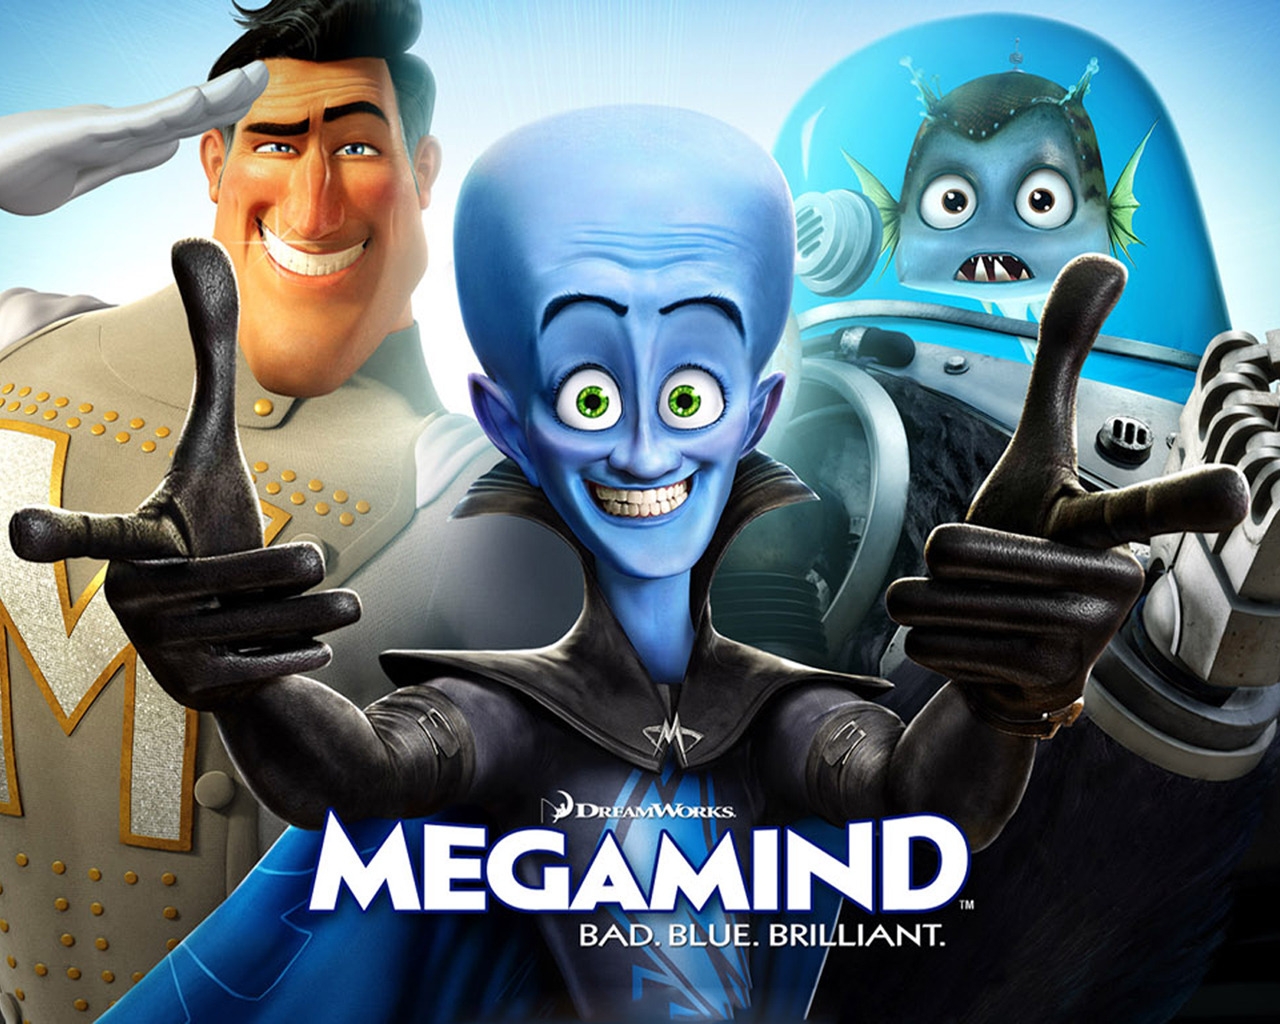 Megamind Characters for 1280 x 1024 resolution